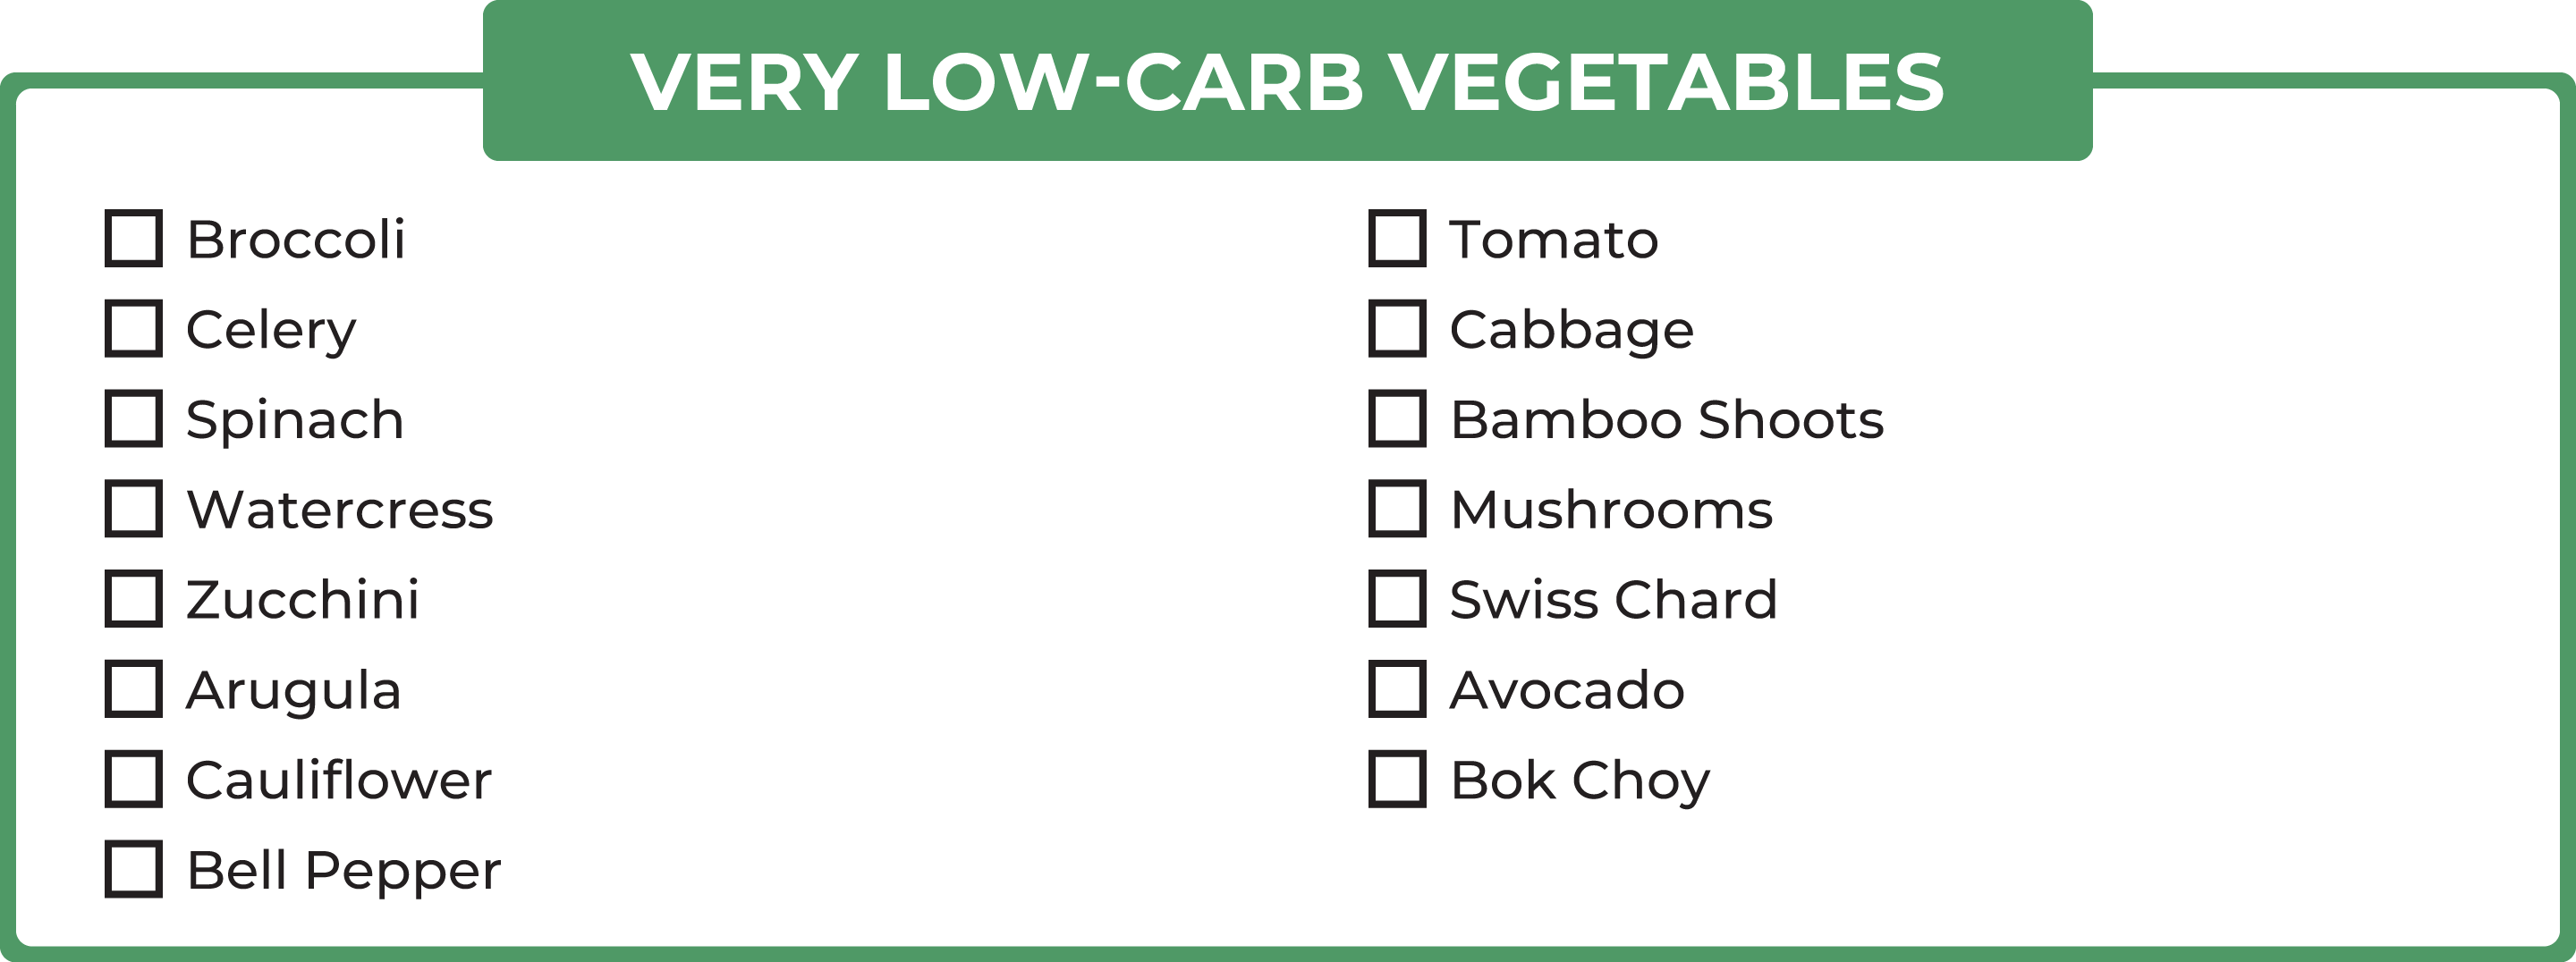 List of very low-carb vegetables